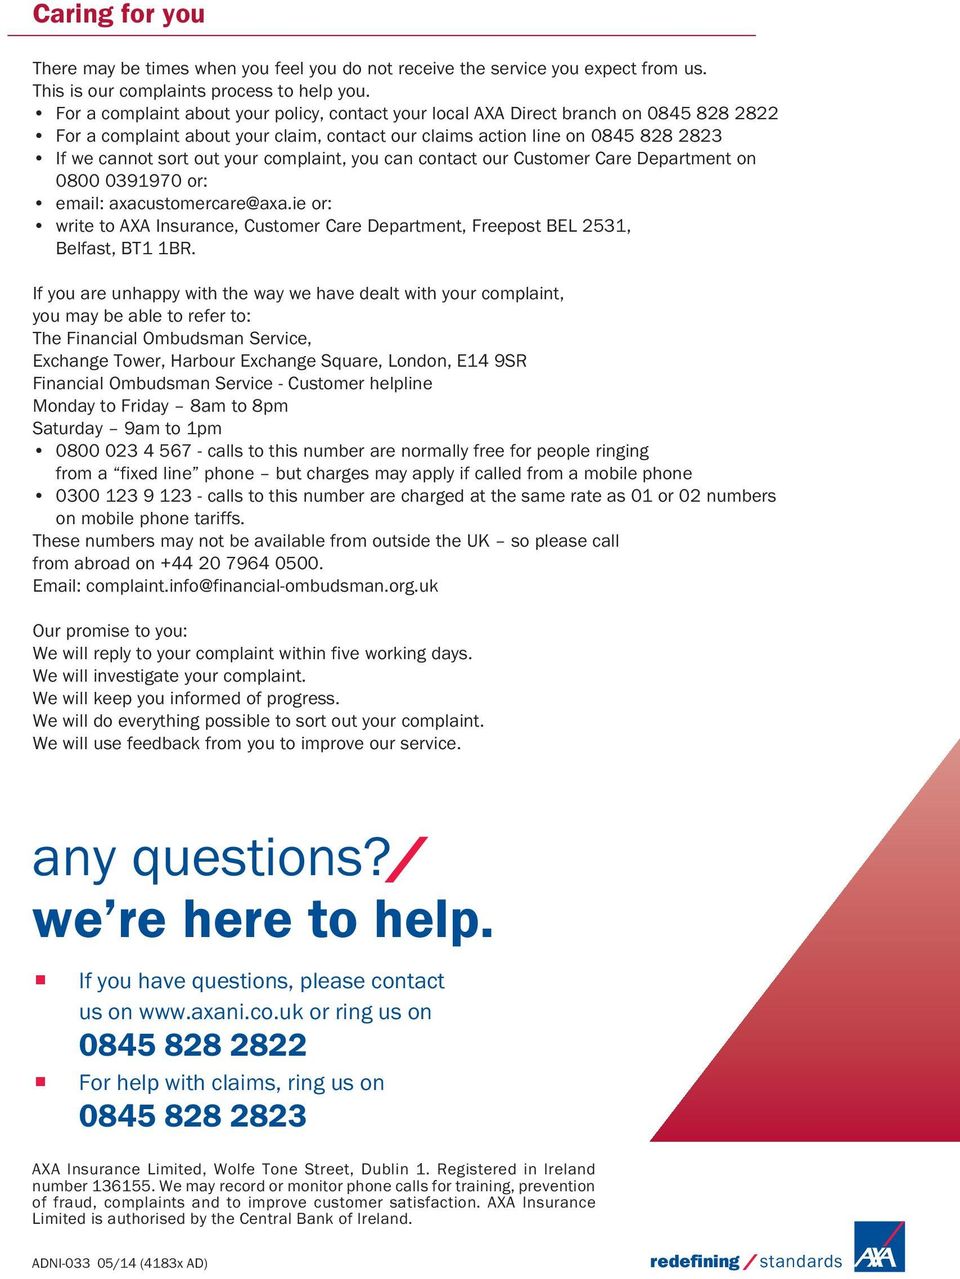 complaint, you can contact our Customer Care Department on 0800 0391970 or: email: axacustomercare@axa.ie or: write to AXA Insurance, Customer Care Department, Freepost BEL 2531, Belfast, BT1 1BR.